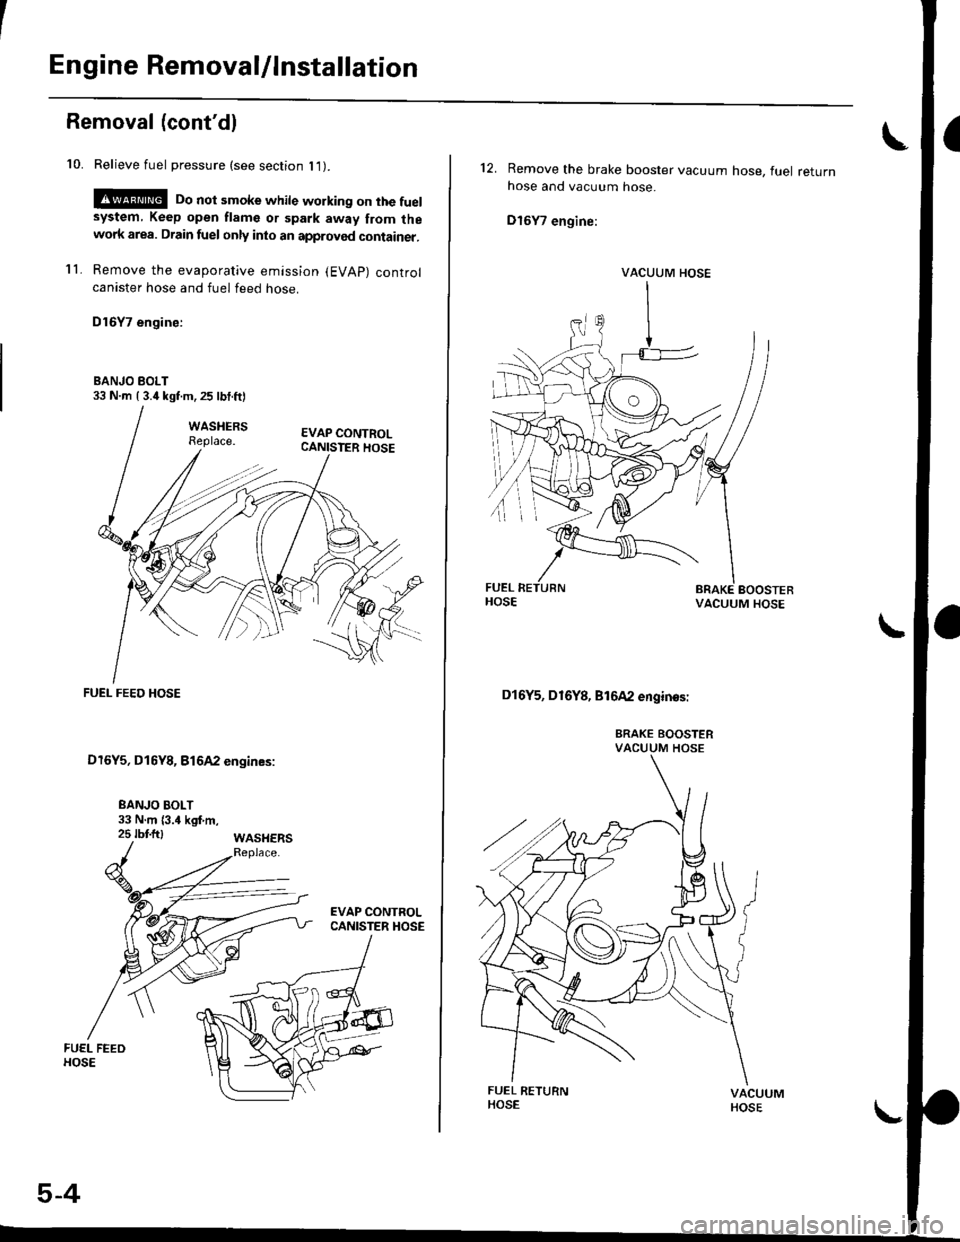 HONDA CIVIC 1997 6.G Workshop Manual Engine Removal/lnstallation
Removal (contdl
10. Relieve fuel pressure (see section l1).
!@ Do not smoke while working on the fuelsystem, Keep open flame or spark away from thewolk area. Drain fuel on